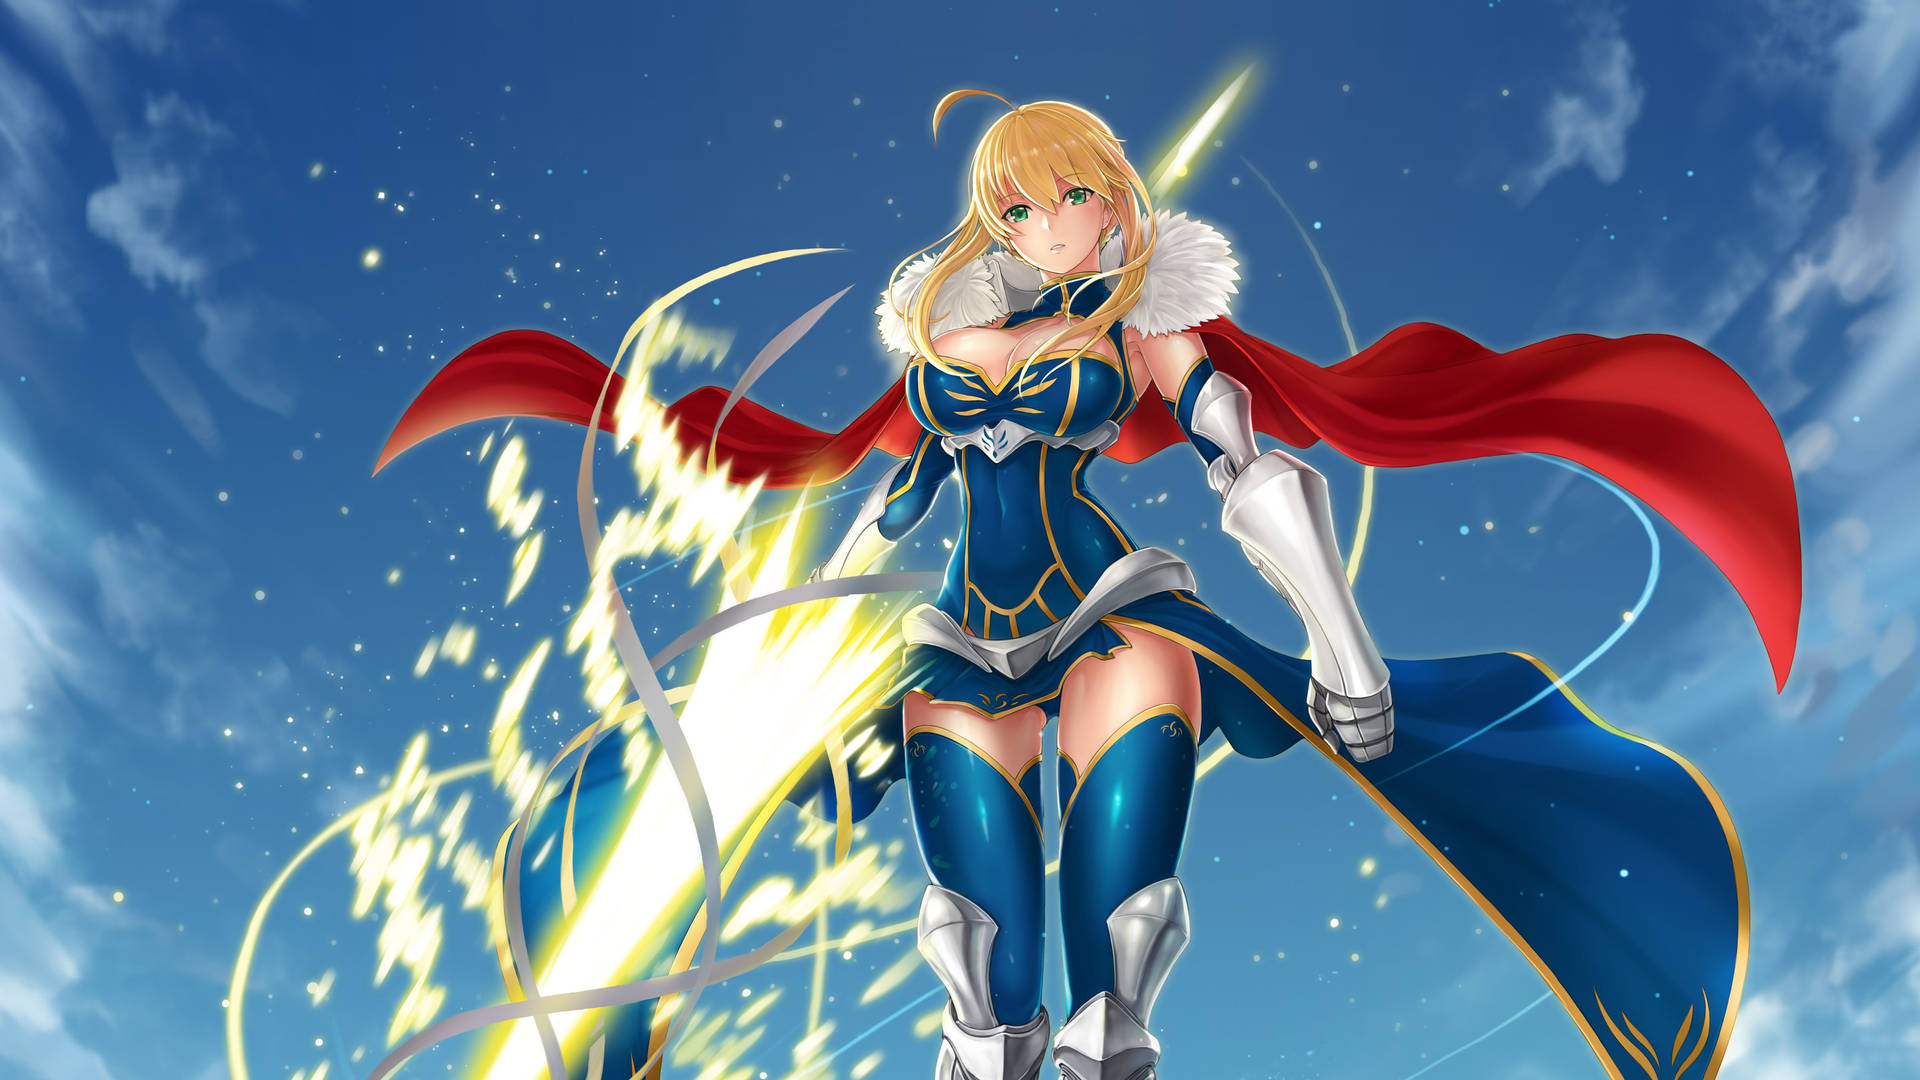 Saber Of Fate Releasing Light Background